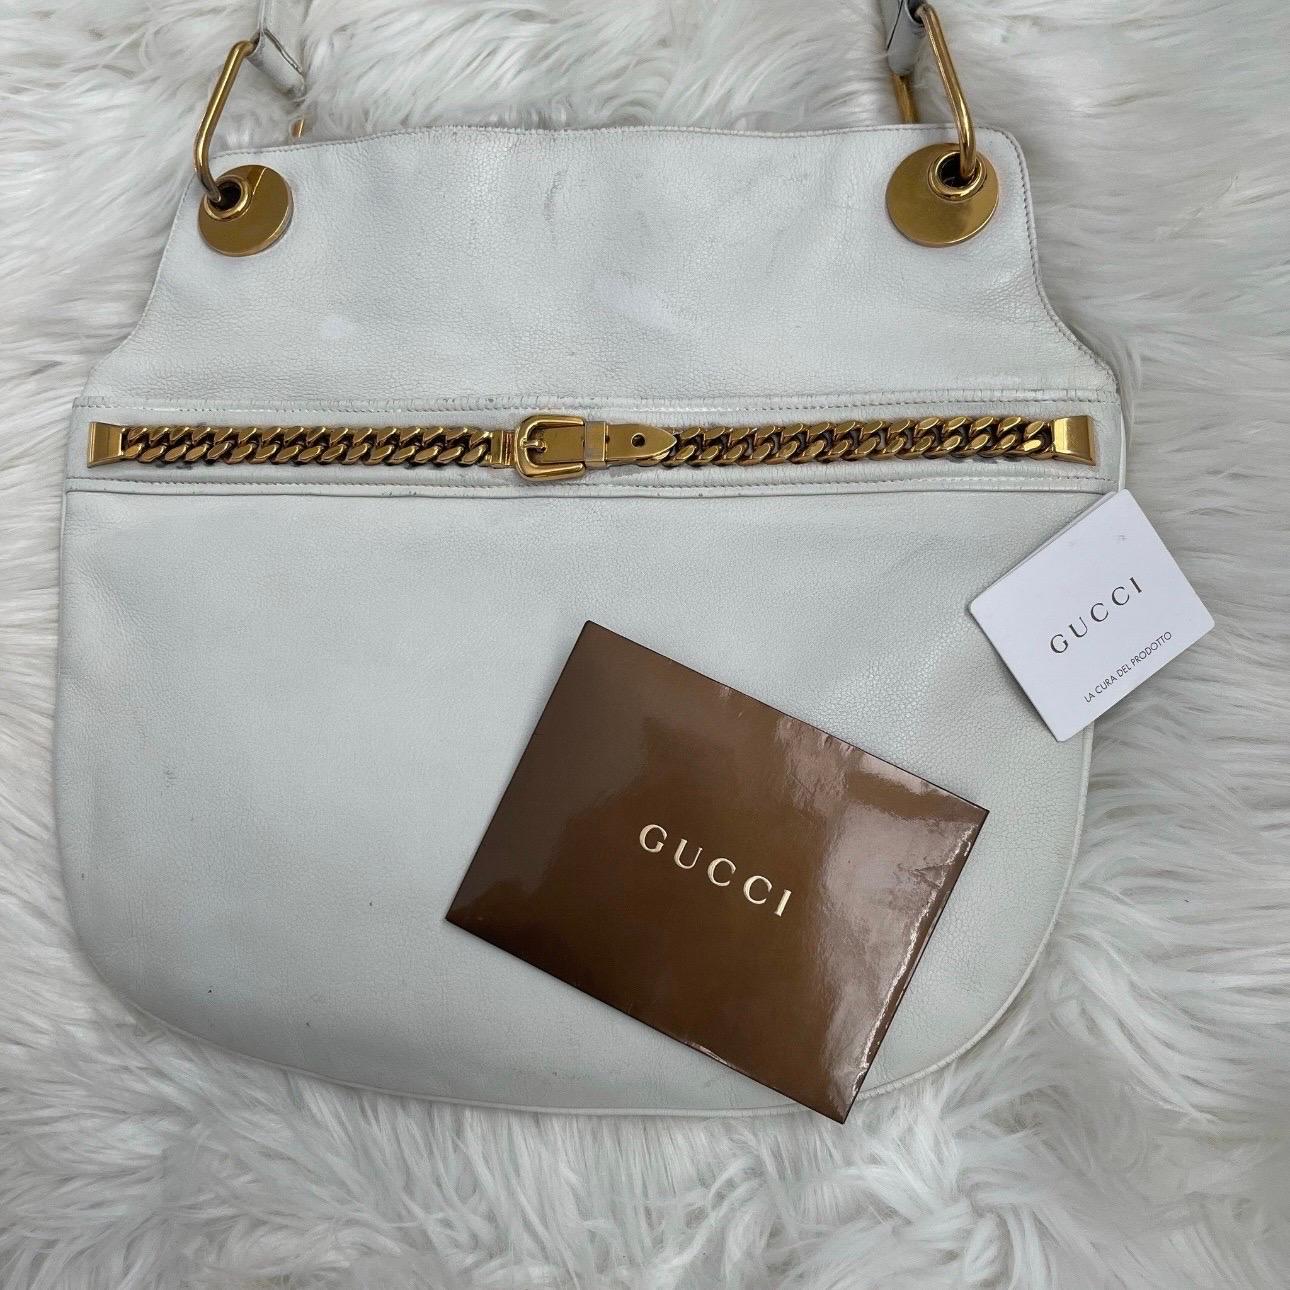 Vintage 80s Gucci GG White Shoulder Bag Crossbody with Gold Belt Chain Across In Fair Condition For Sale In Malibu, CA